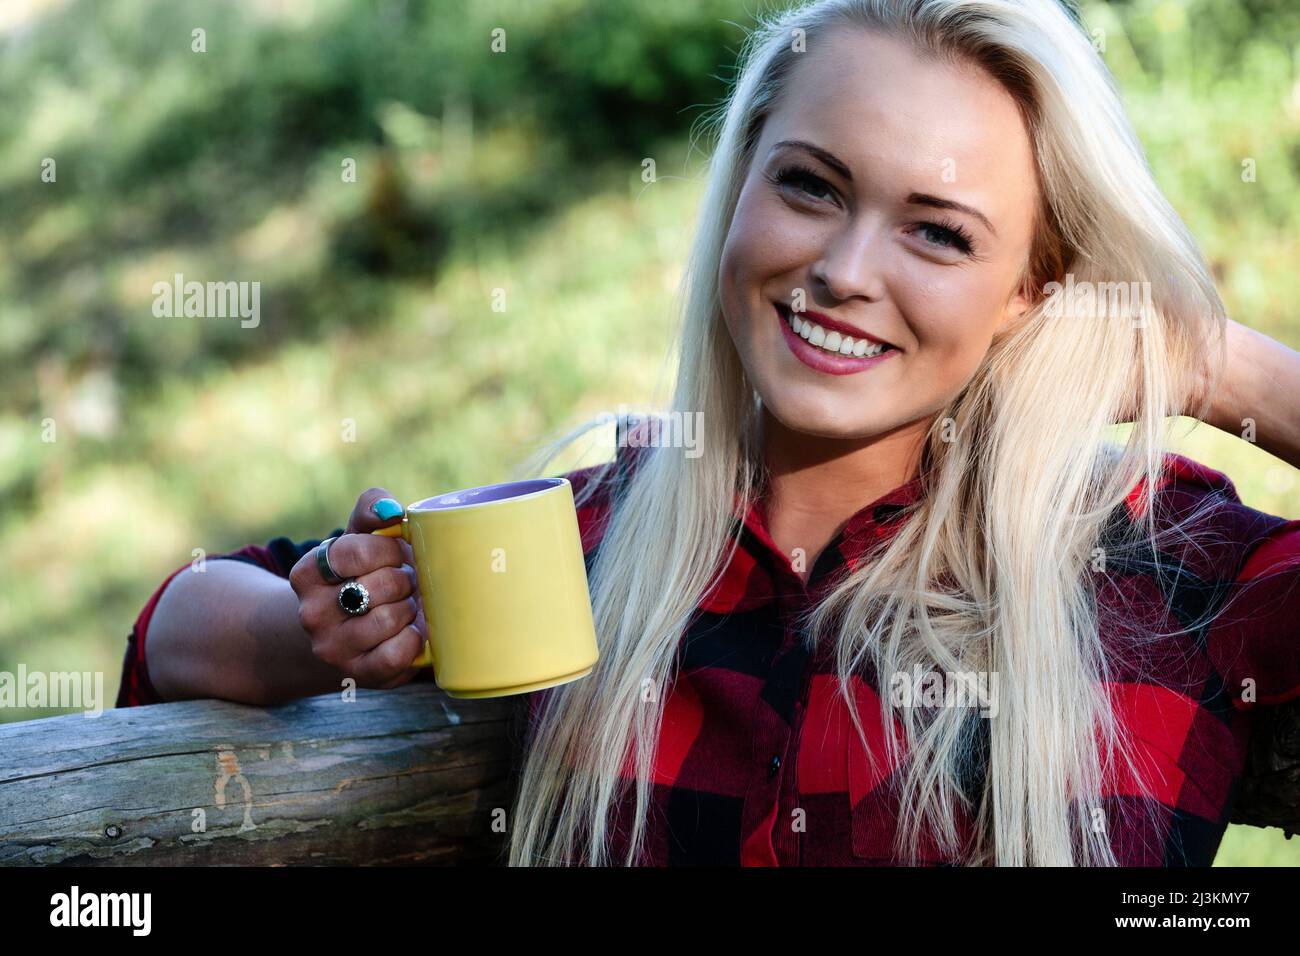 Beautiful happy smiling blond woman drinking a mug of hot coffee as she relaxes outdoors leaning on a wooden railing Stock Photo